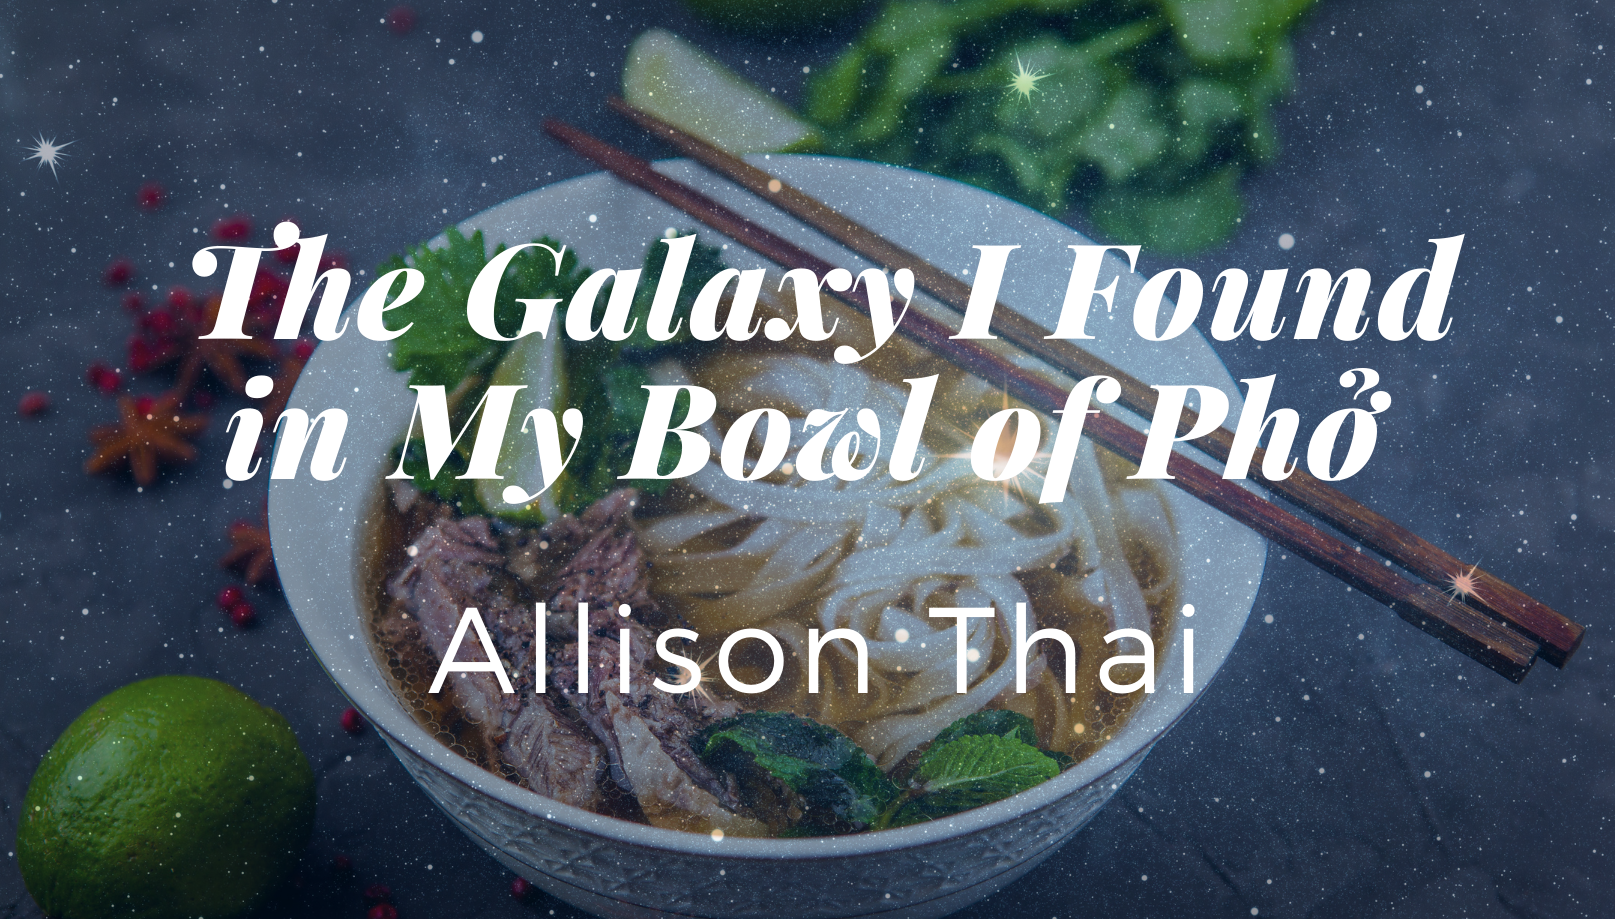 The title card for The Galaxy I Found in My Bowl of Phở by Allison Thai. The title appears in white over an image of a bowl of phở. The bowl is white and there are brown chopsticks resting atop it. Scattered around the bowl are anise, lime, and cilantro. A galaxy of stars is superimposed over the whole image.